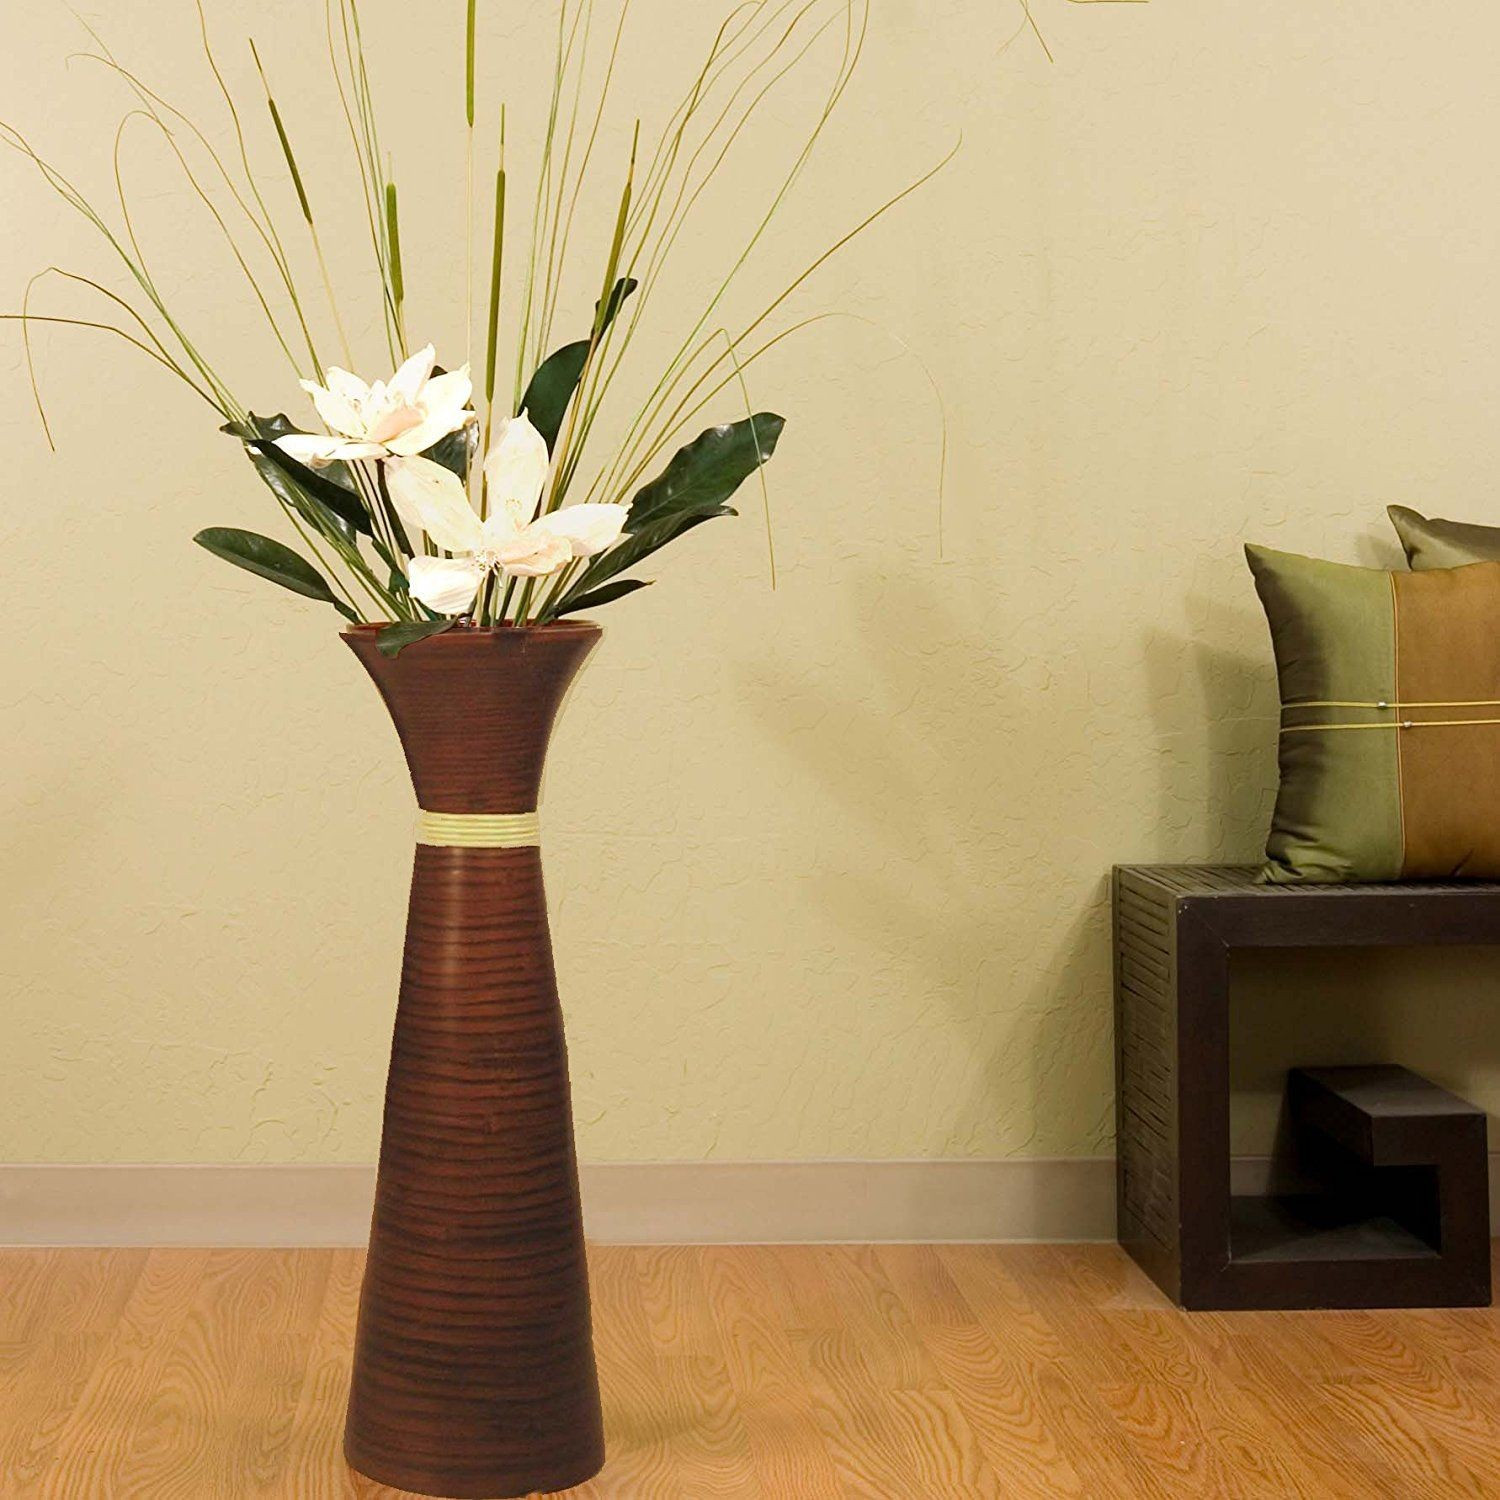 27 Awesome Ceramic Floor Vase 2024 free download ceramic floor vase of 19 luxury bamboo floor vase images dizpos com inside bamboo floor vase awesome green floral crafts 28 in plantation bamboo floor vase brown with pictures